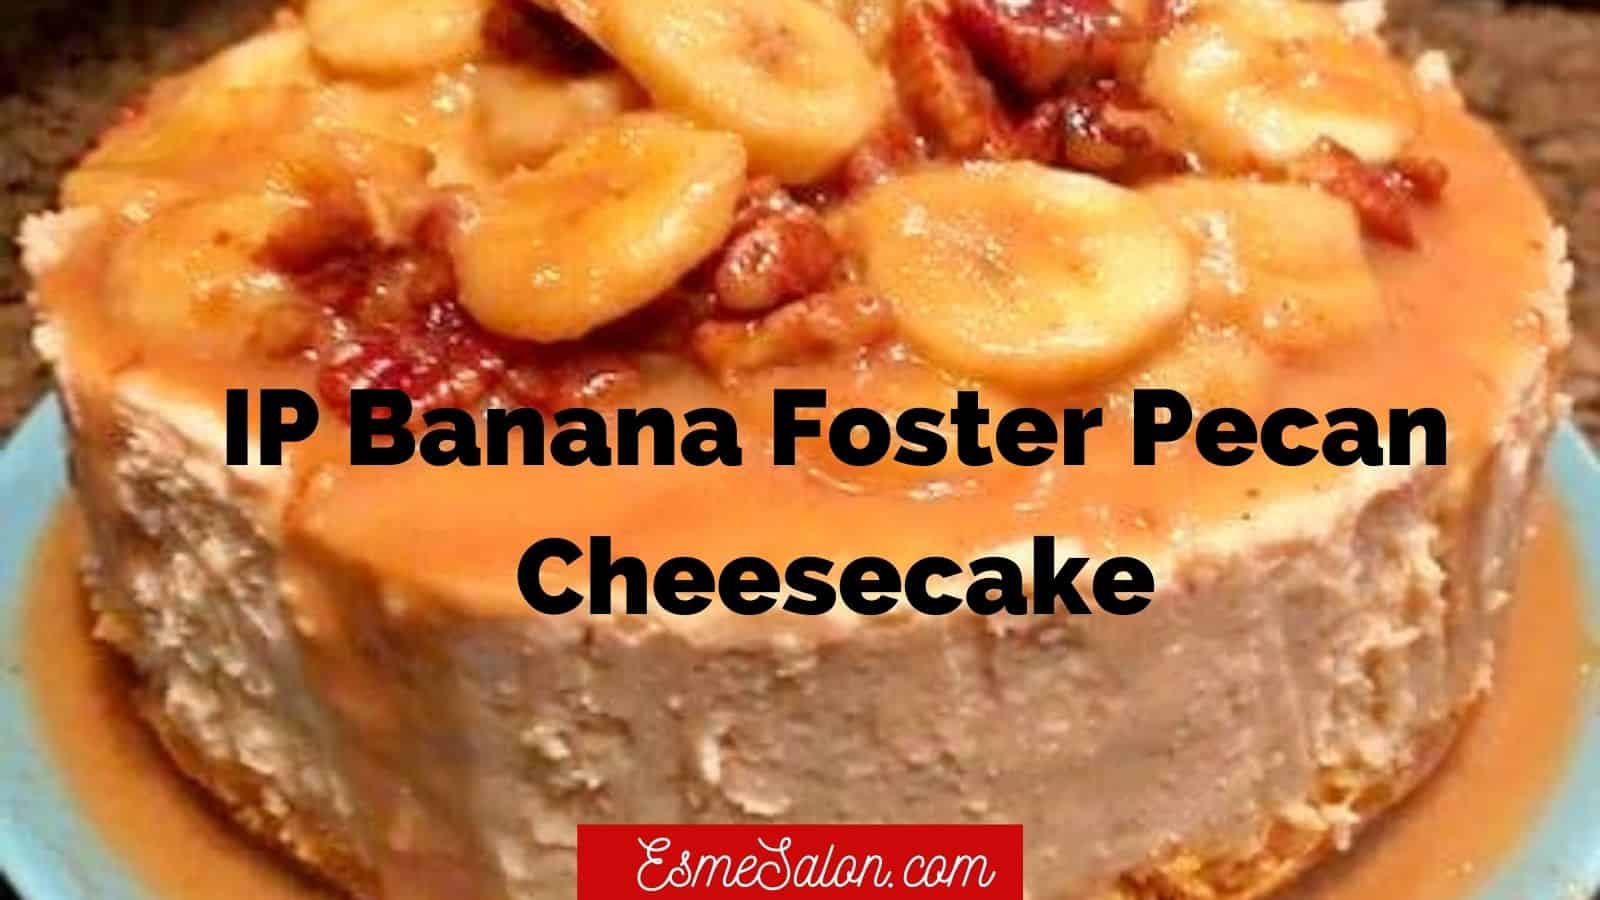 Cheesecake has a vanilla wafer cookie crust and dark rum filling topped with bananas and pecans